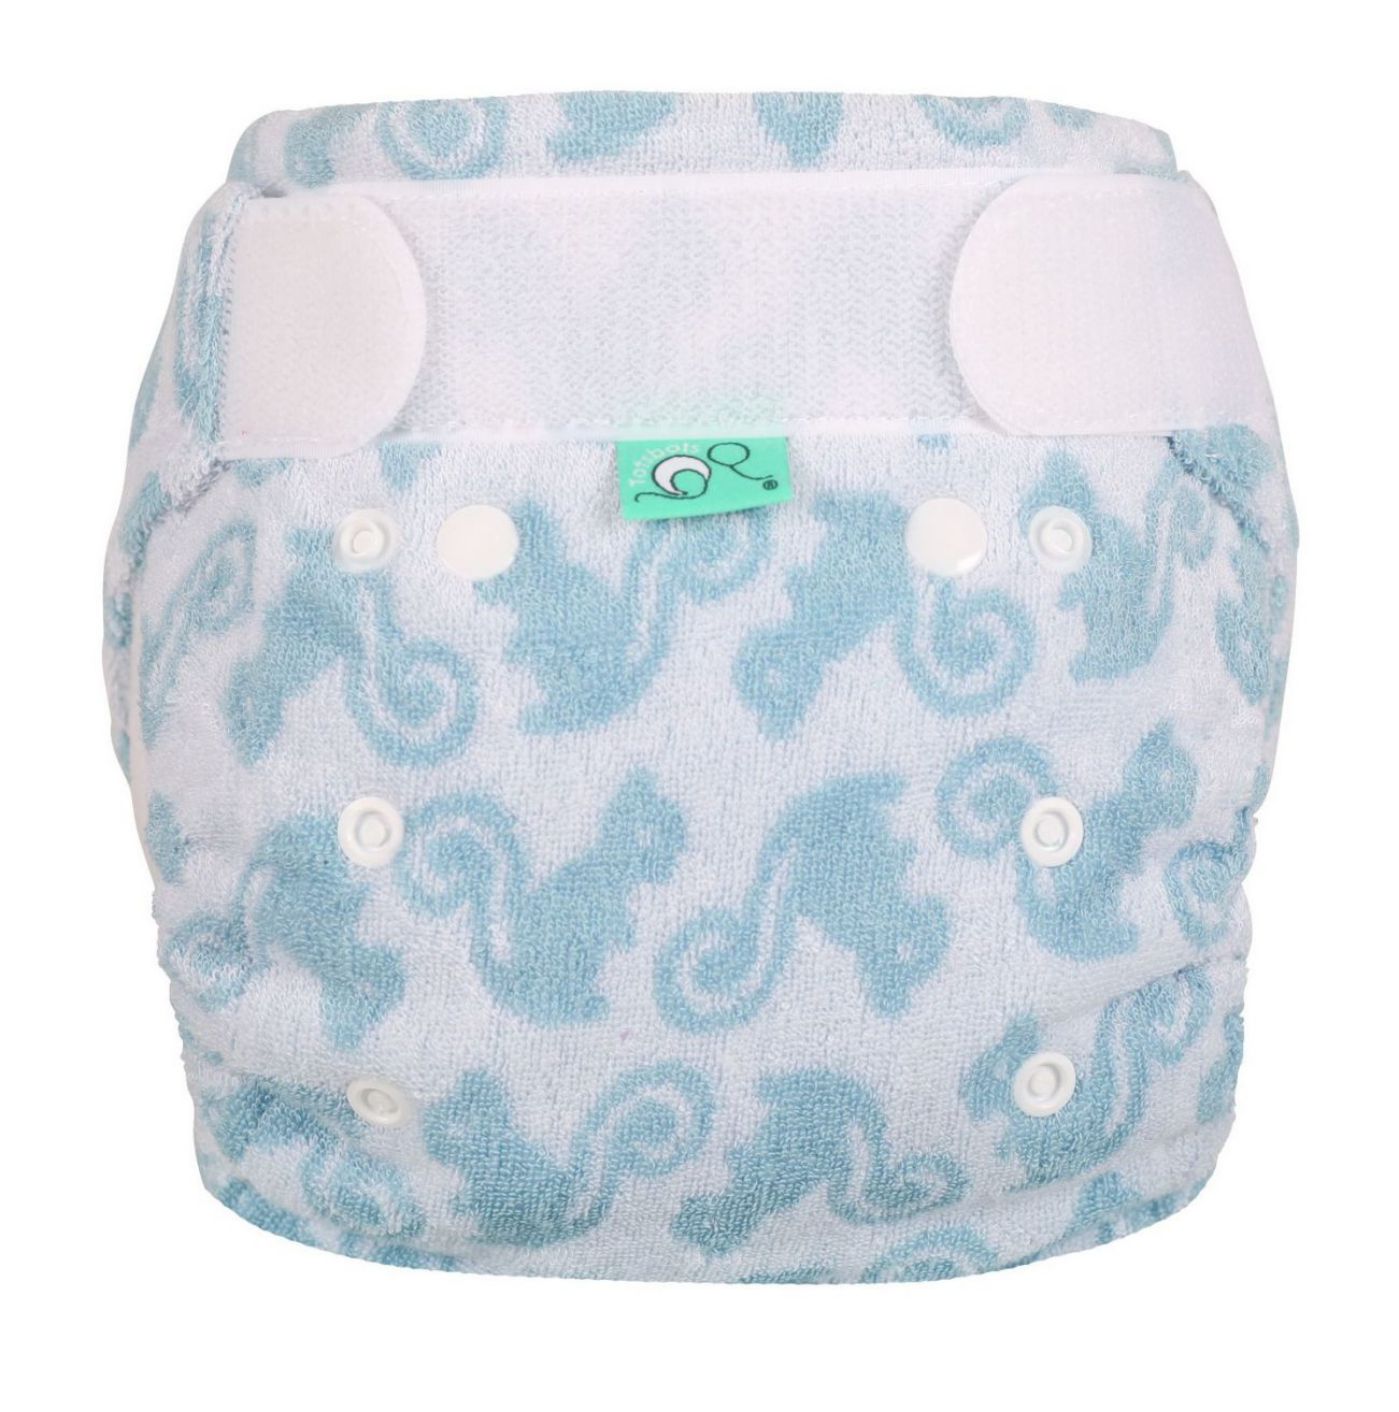 TotsBots Bamboozle Fitted Nappy Size: One Size (4 - 16kg) / TotsBots pattern: Squiddles